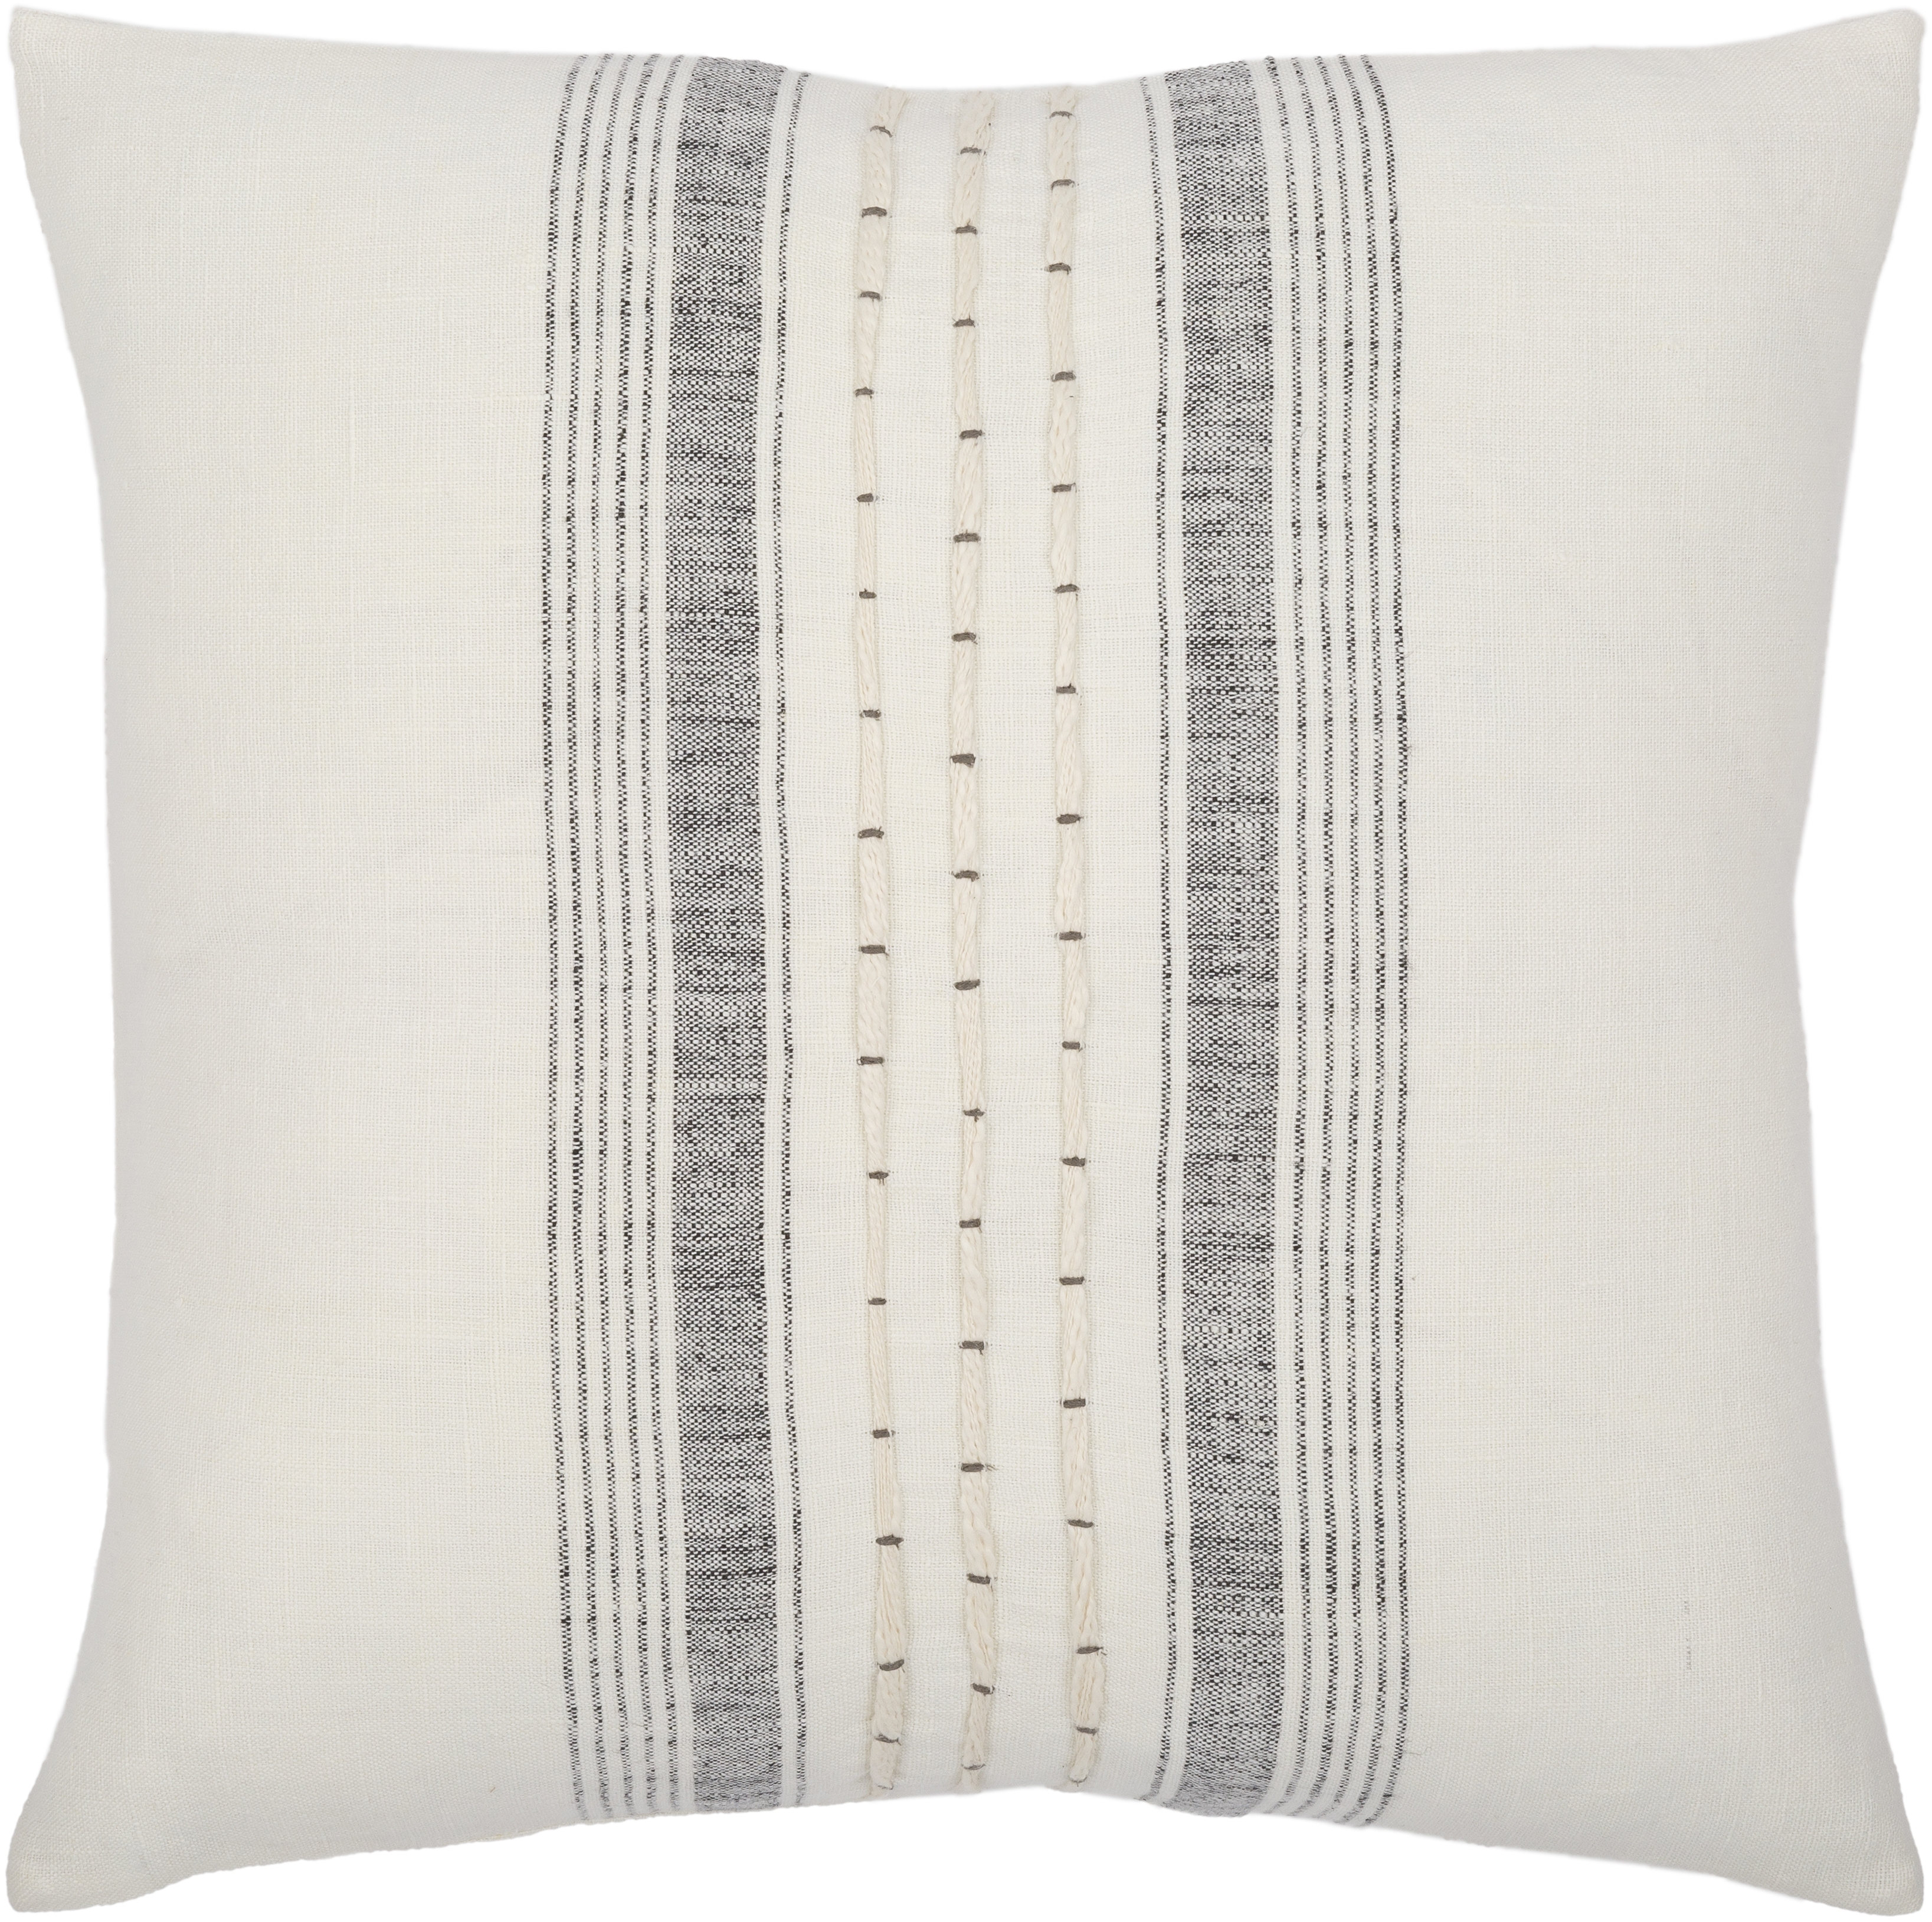 Linen Stripe Embellished Throw Pillow, 18" x 18", pillow cover only - Image 0